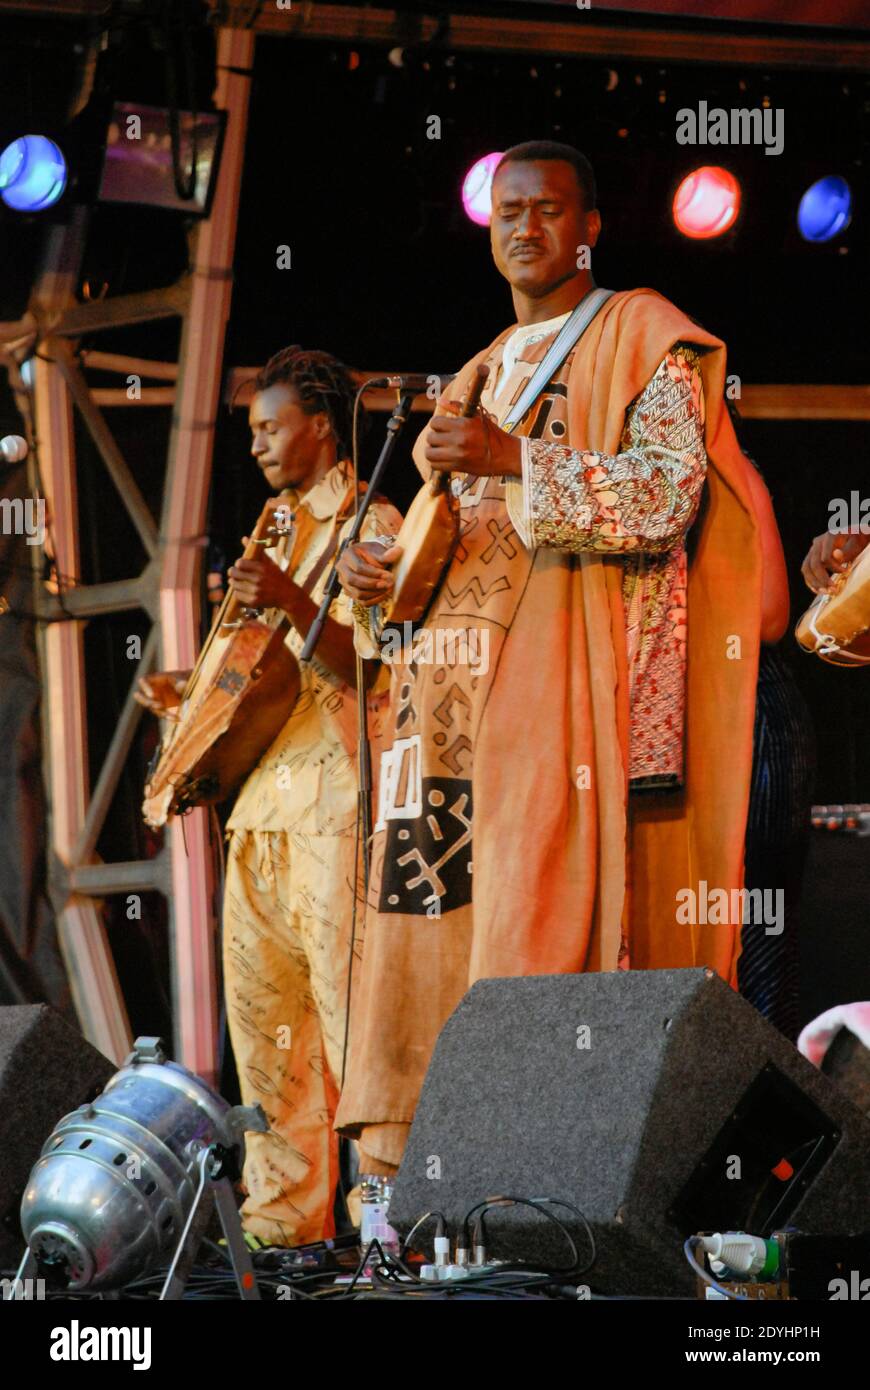 UK, London, Canary Wharf, Canada Square. Bassekou Kouyate (on right)  & Ngoni Ba from Mali toured after release of their debut album Segu Blue in 2007. Stock Photo